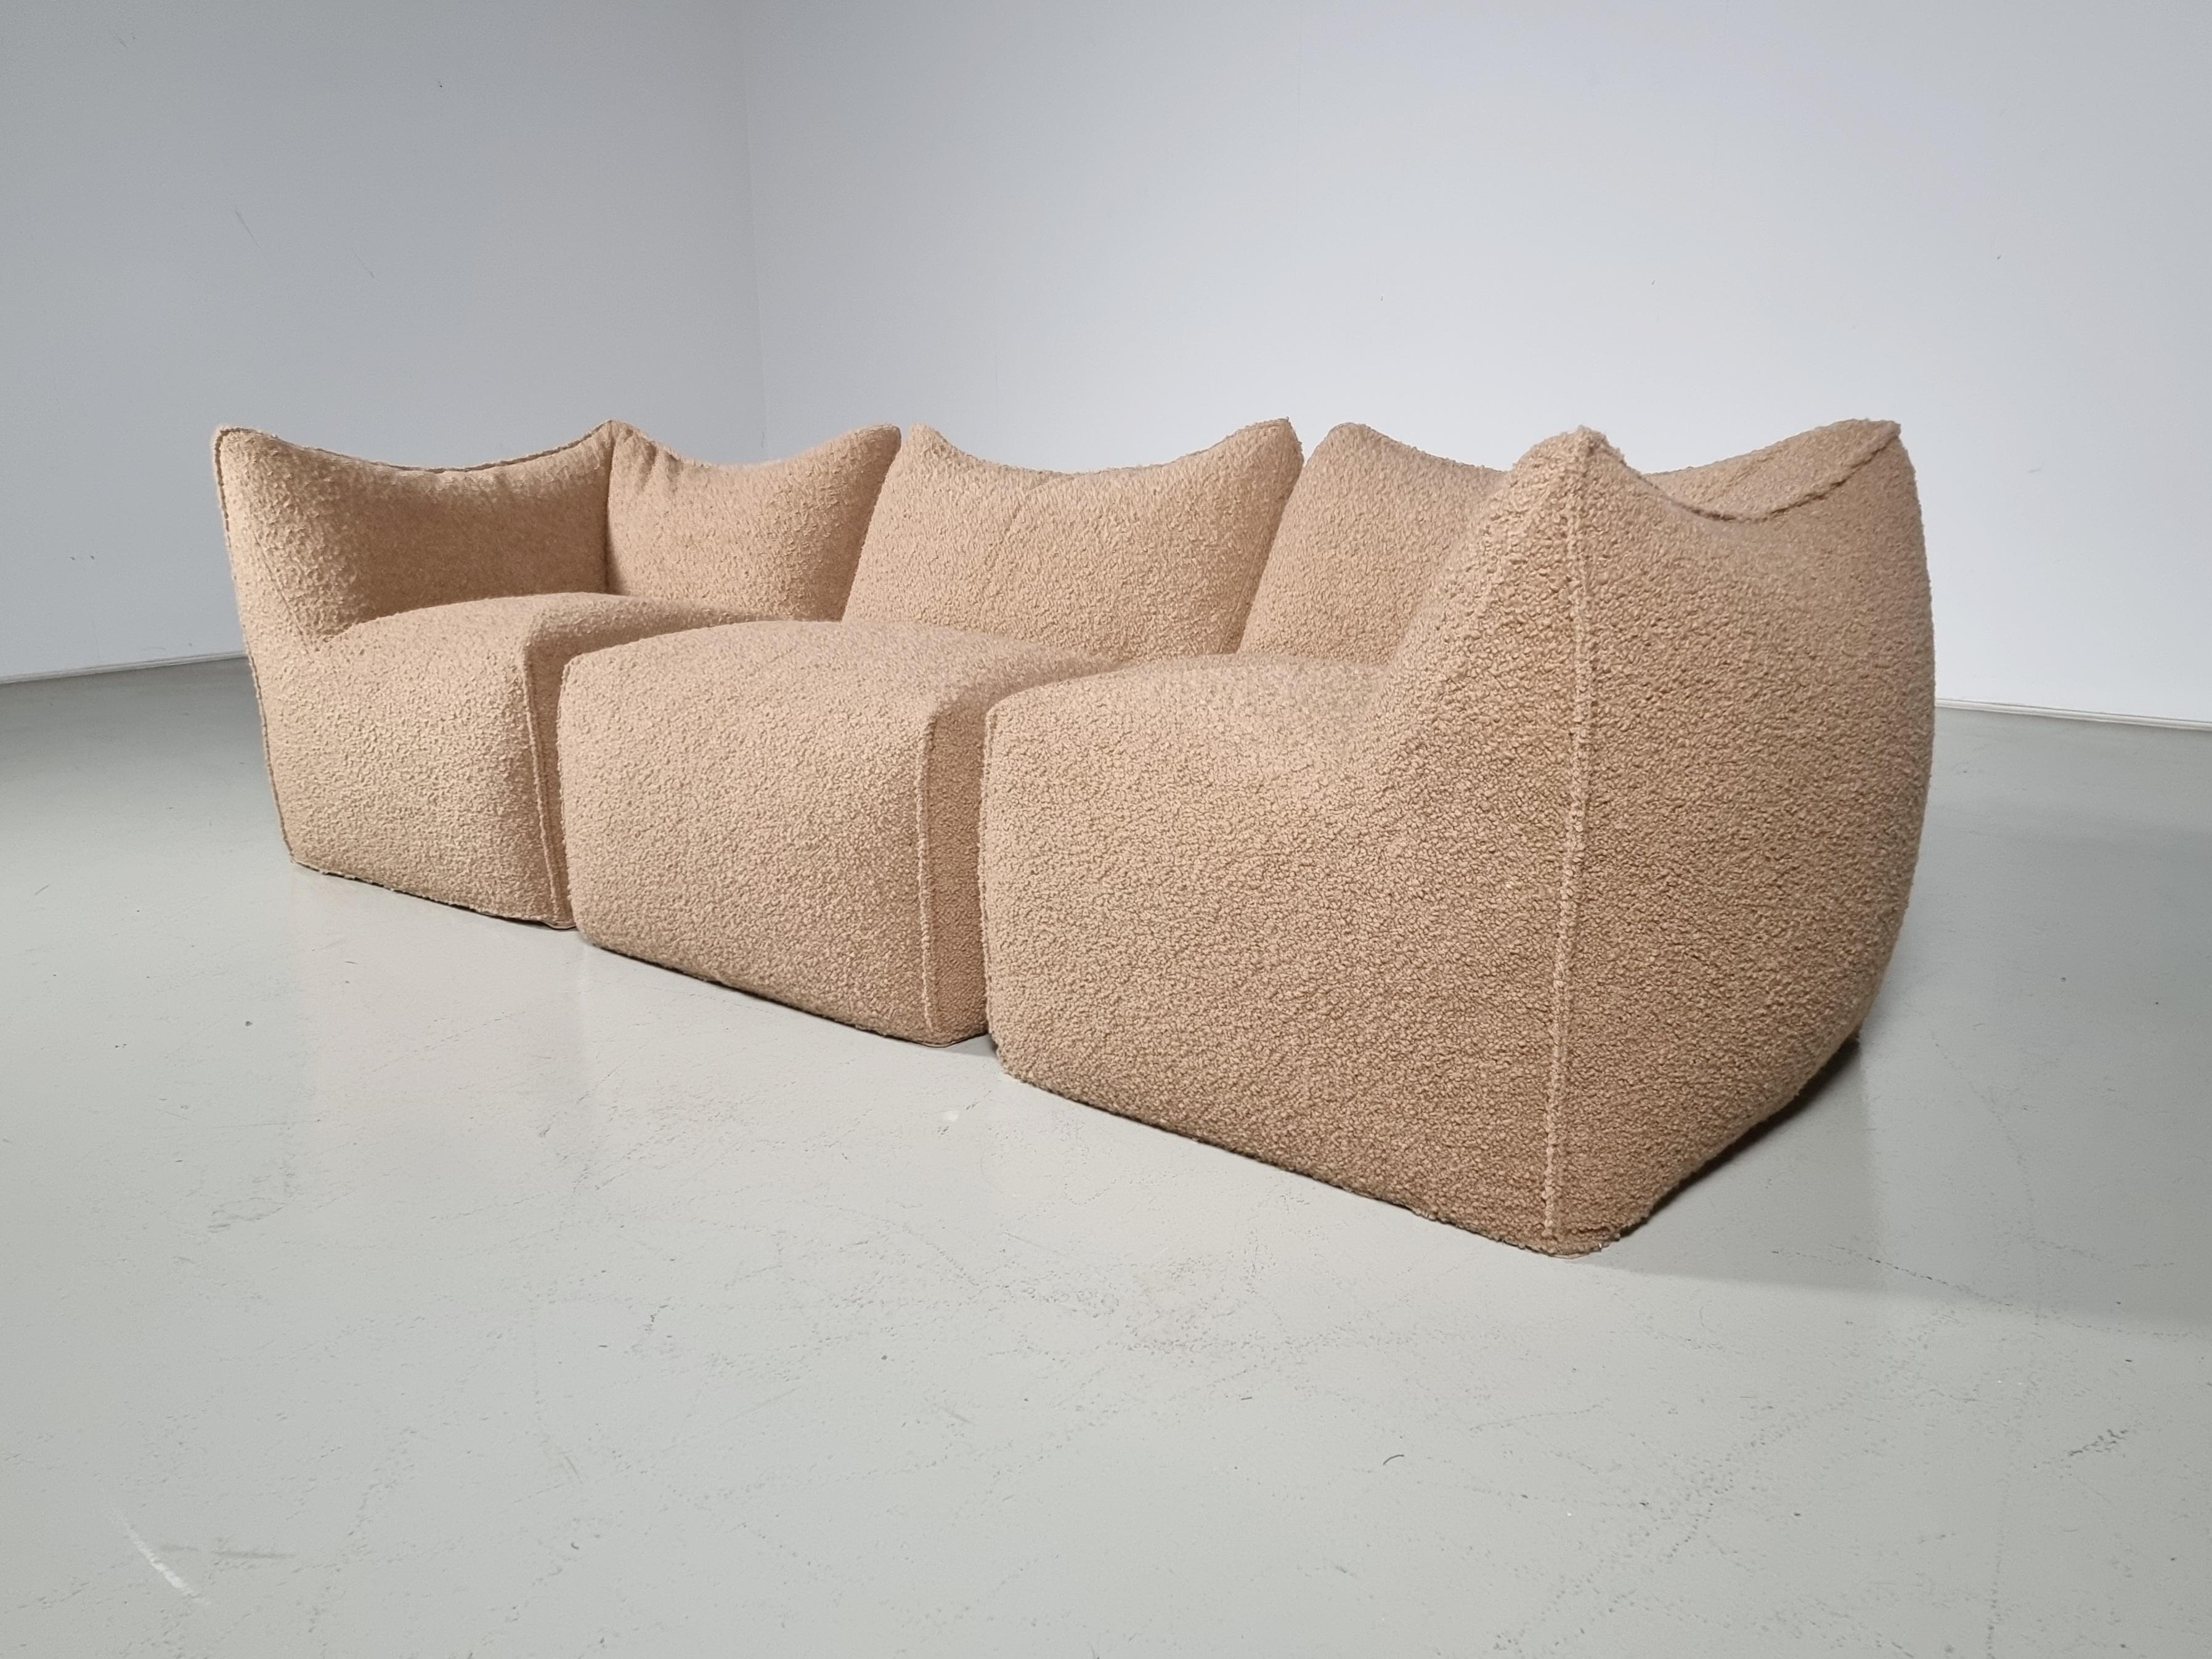 Le Bambole sectional 3=seater sofa by Mario Bellini for B&B Italia, 1970s. The Bambole is an iconic piece of Italian design. It was awarded the 1979 'Compasso d'Oro' award. An example of Le Bambole is included in MoMA's permanent collection. It's